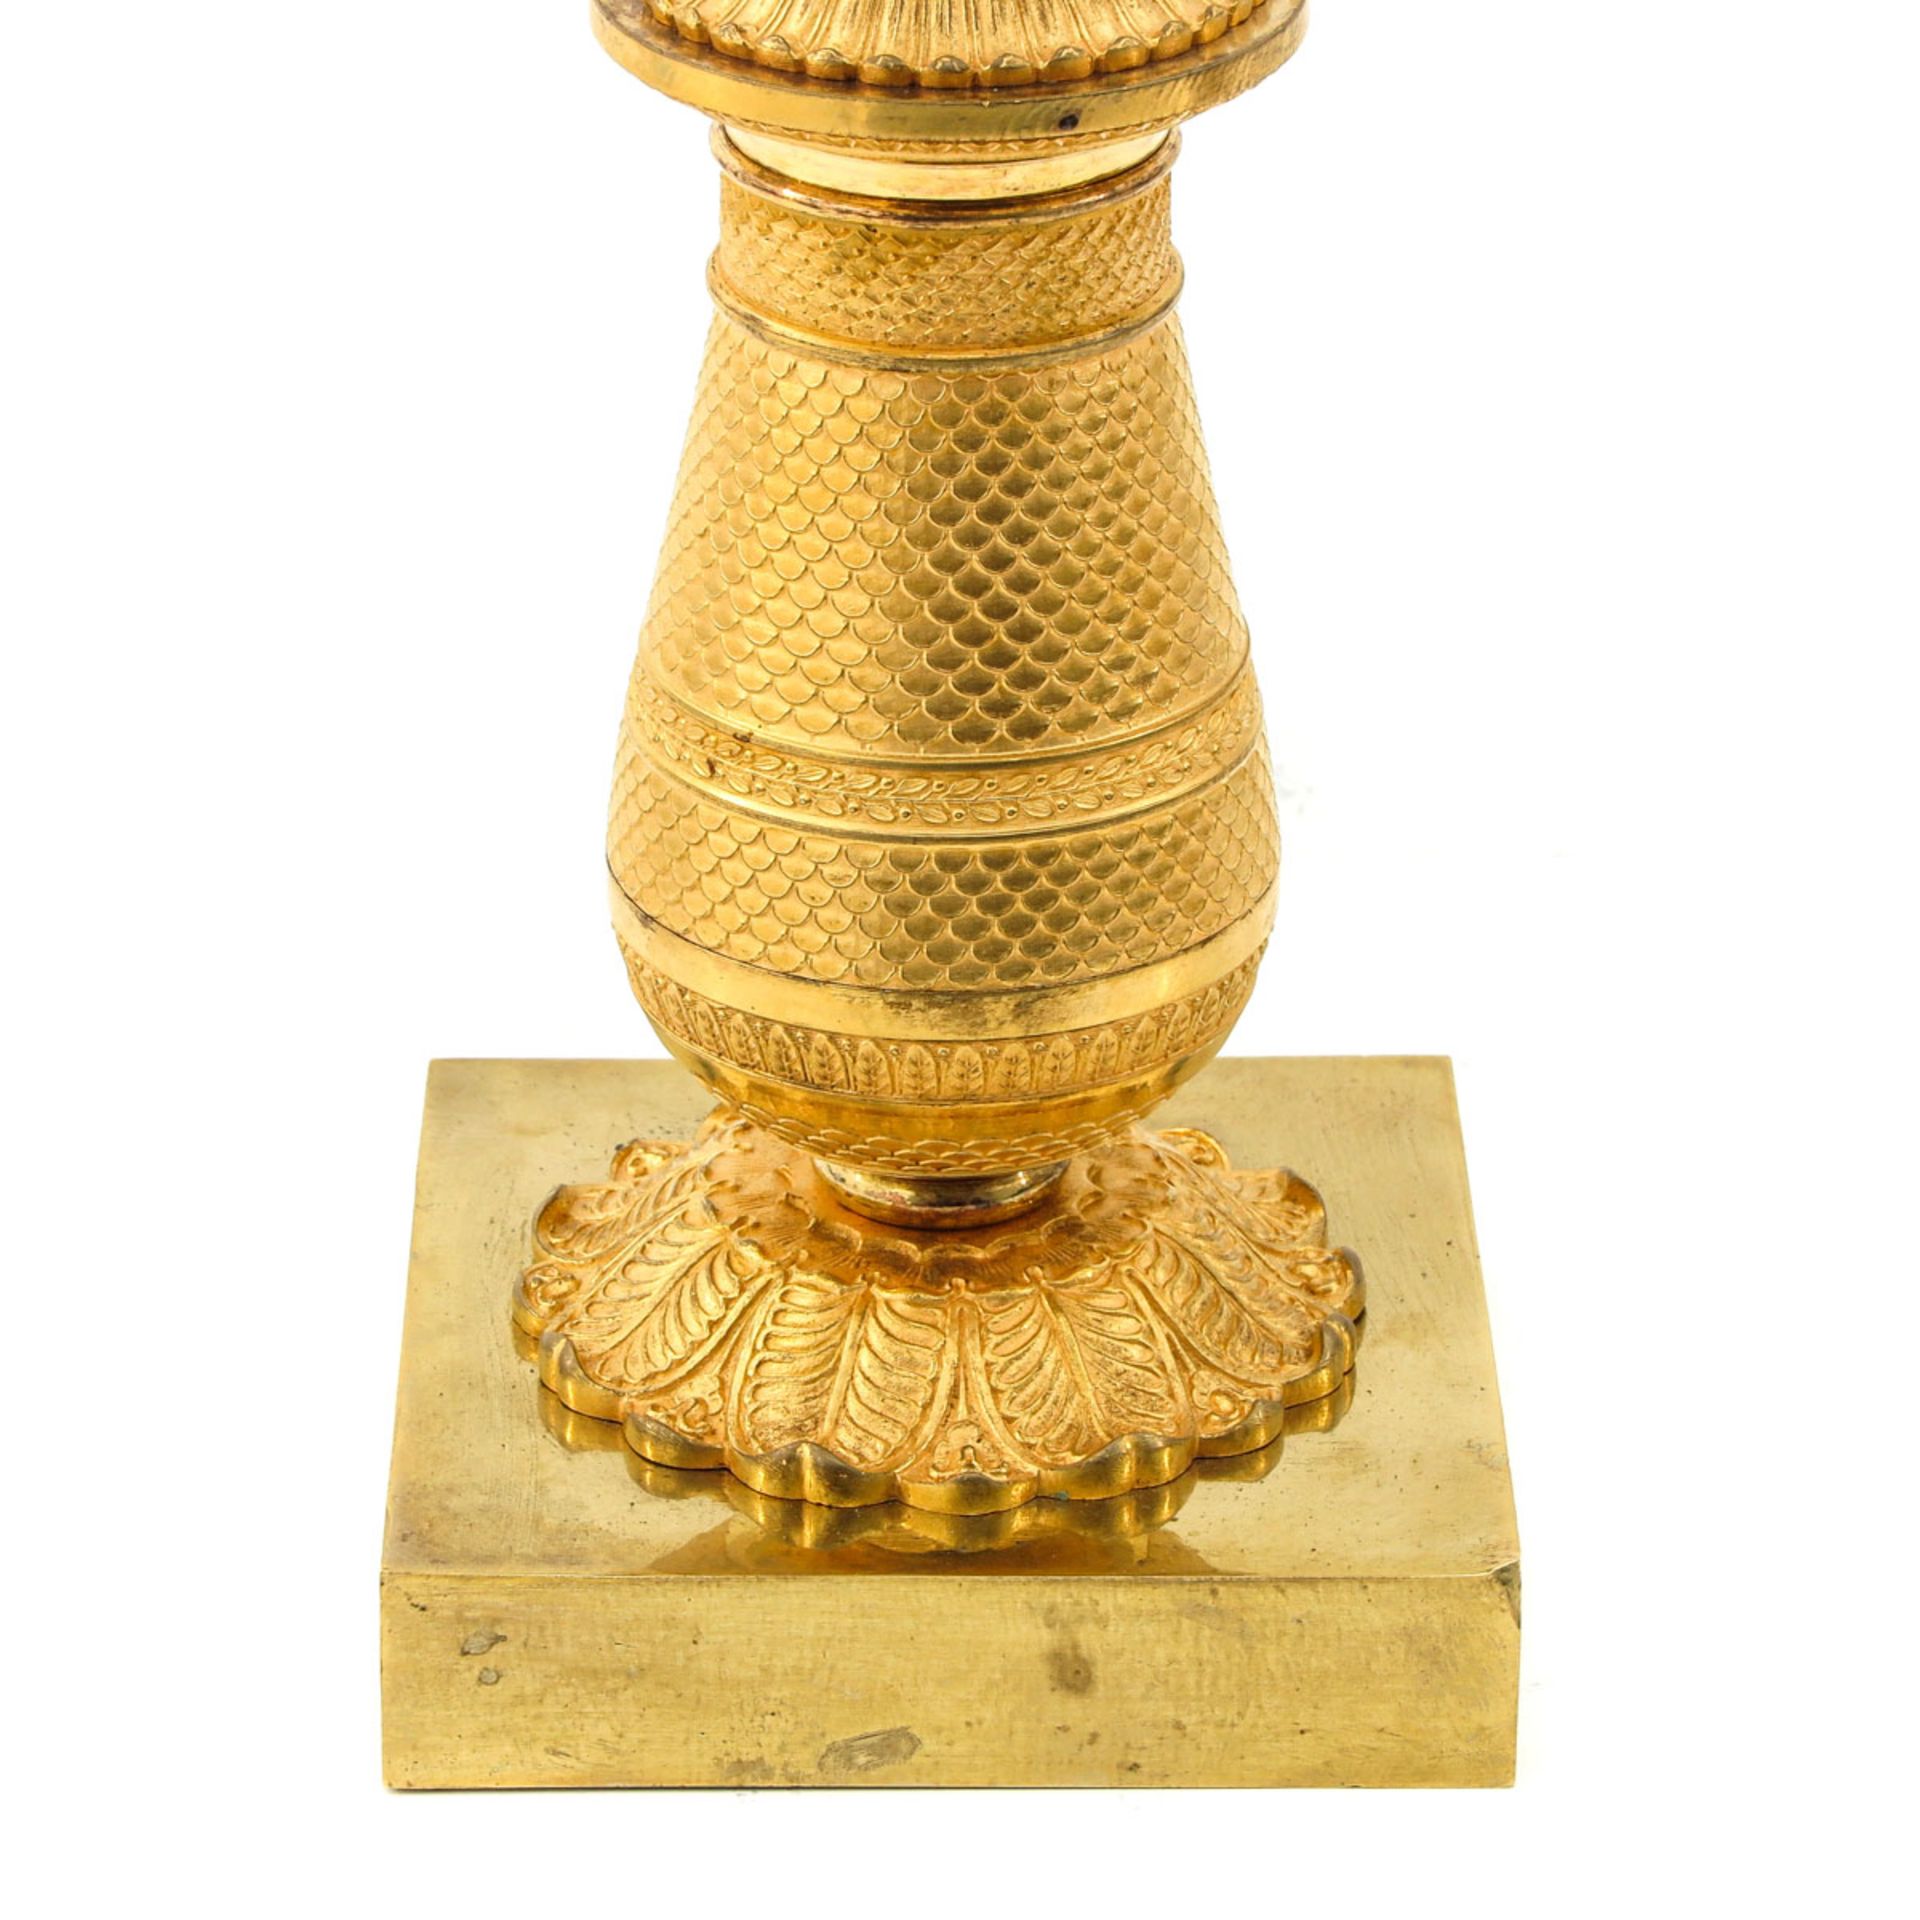 A Pair of Empire Period Candlesticks - Image 10 of 10